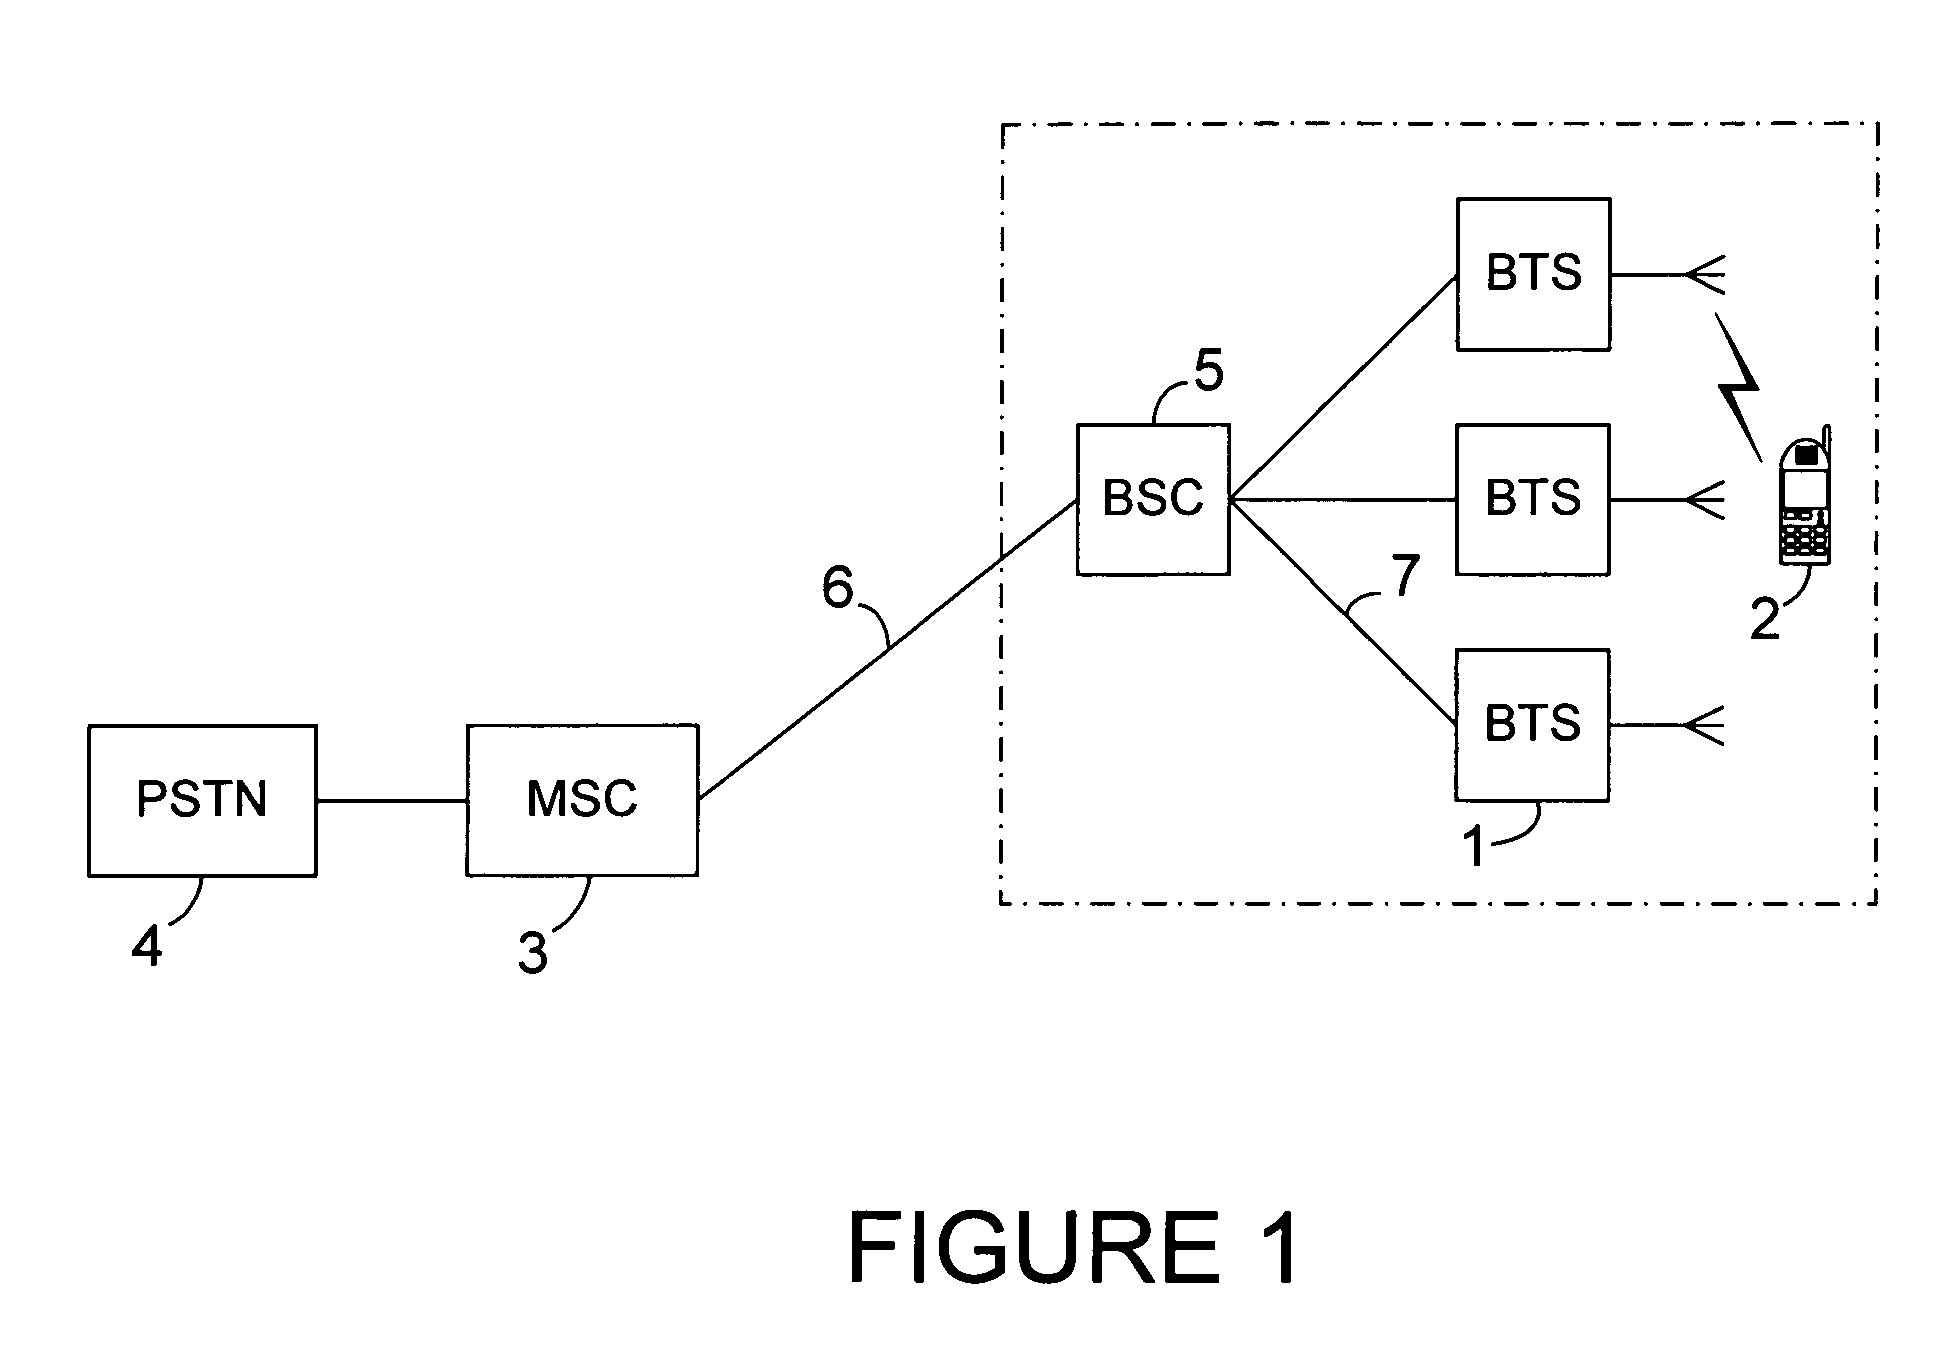 System and method for automatically configuring and integrating a radio base station into an existing wireless cellular communication network with full bi-directional roaming and handover capability